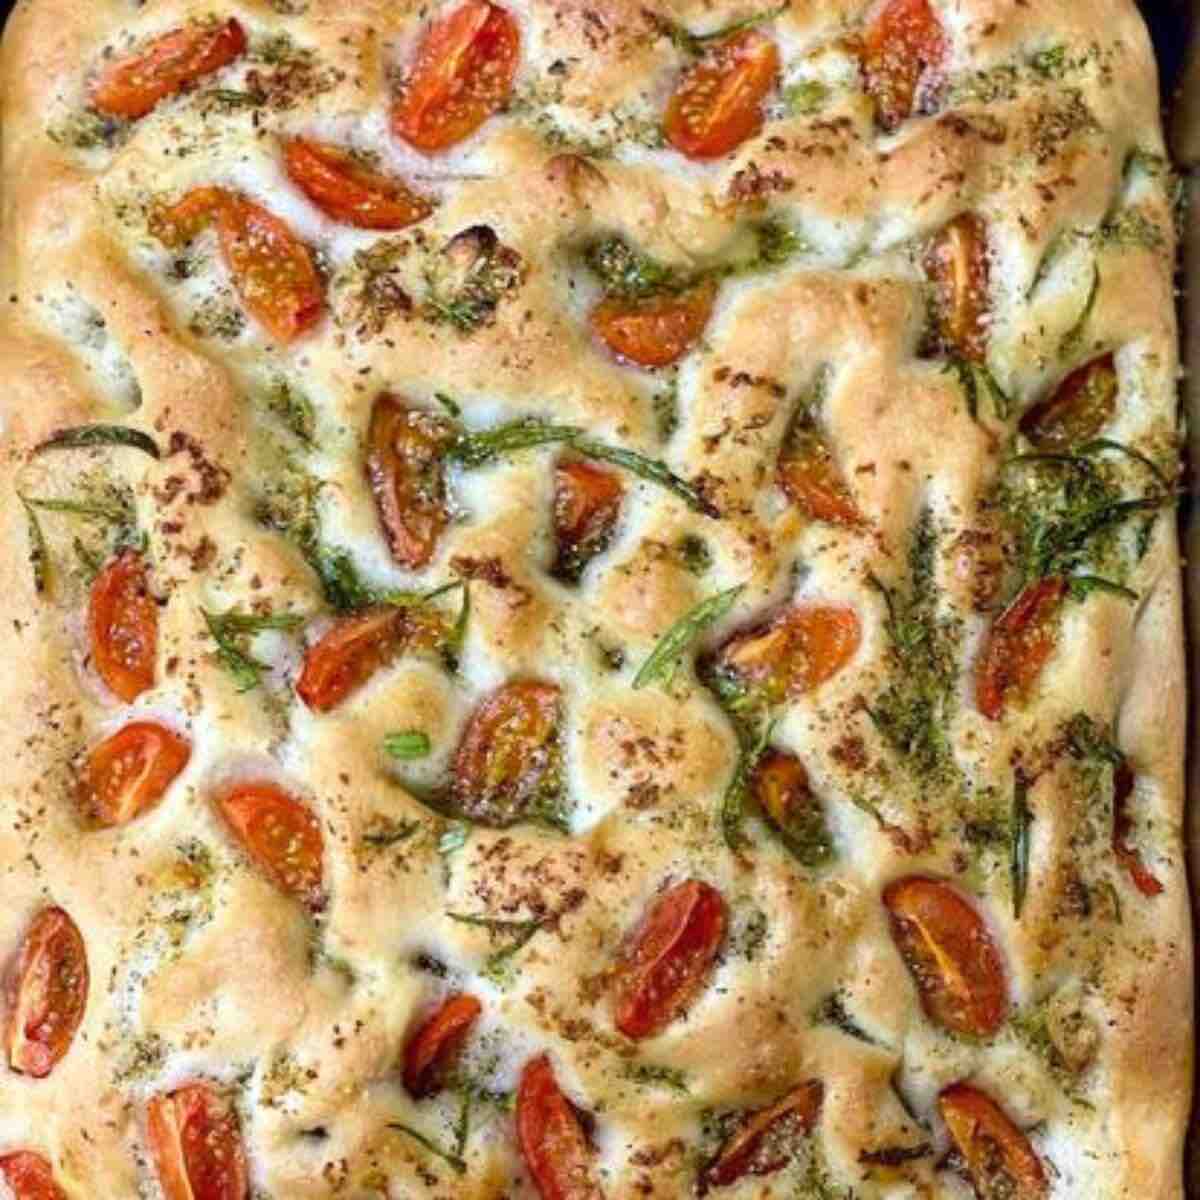 talian Focaccia Bread Recipe with cherry tomatoes, rosemary, and extra virgin olive oil, seasoned with Himalayan salt